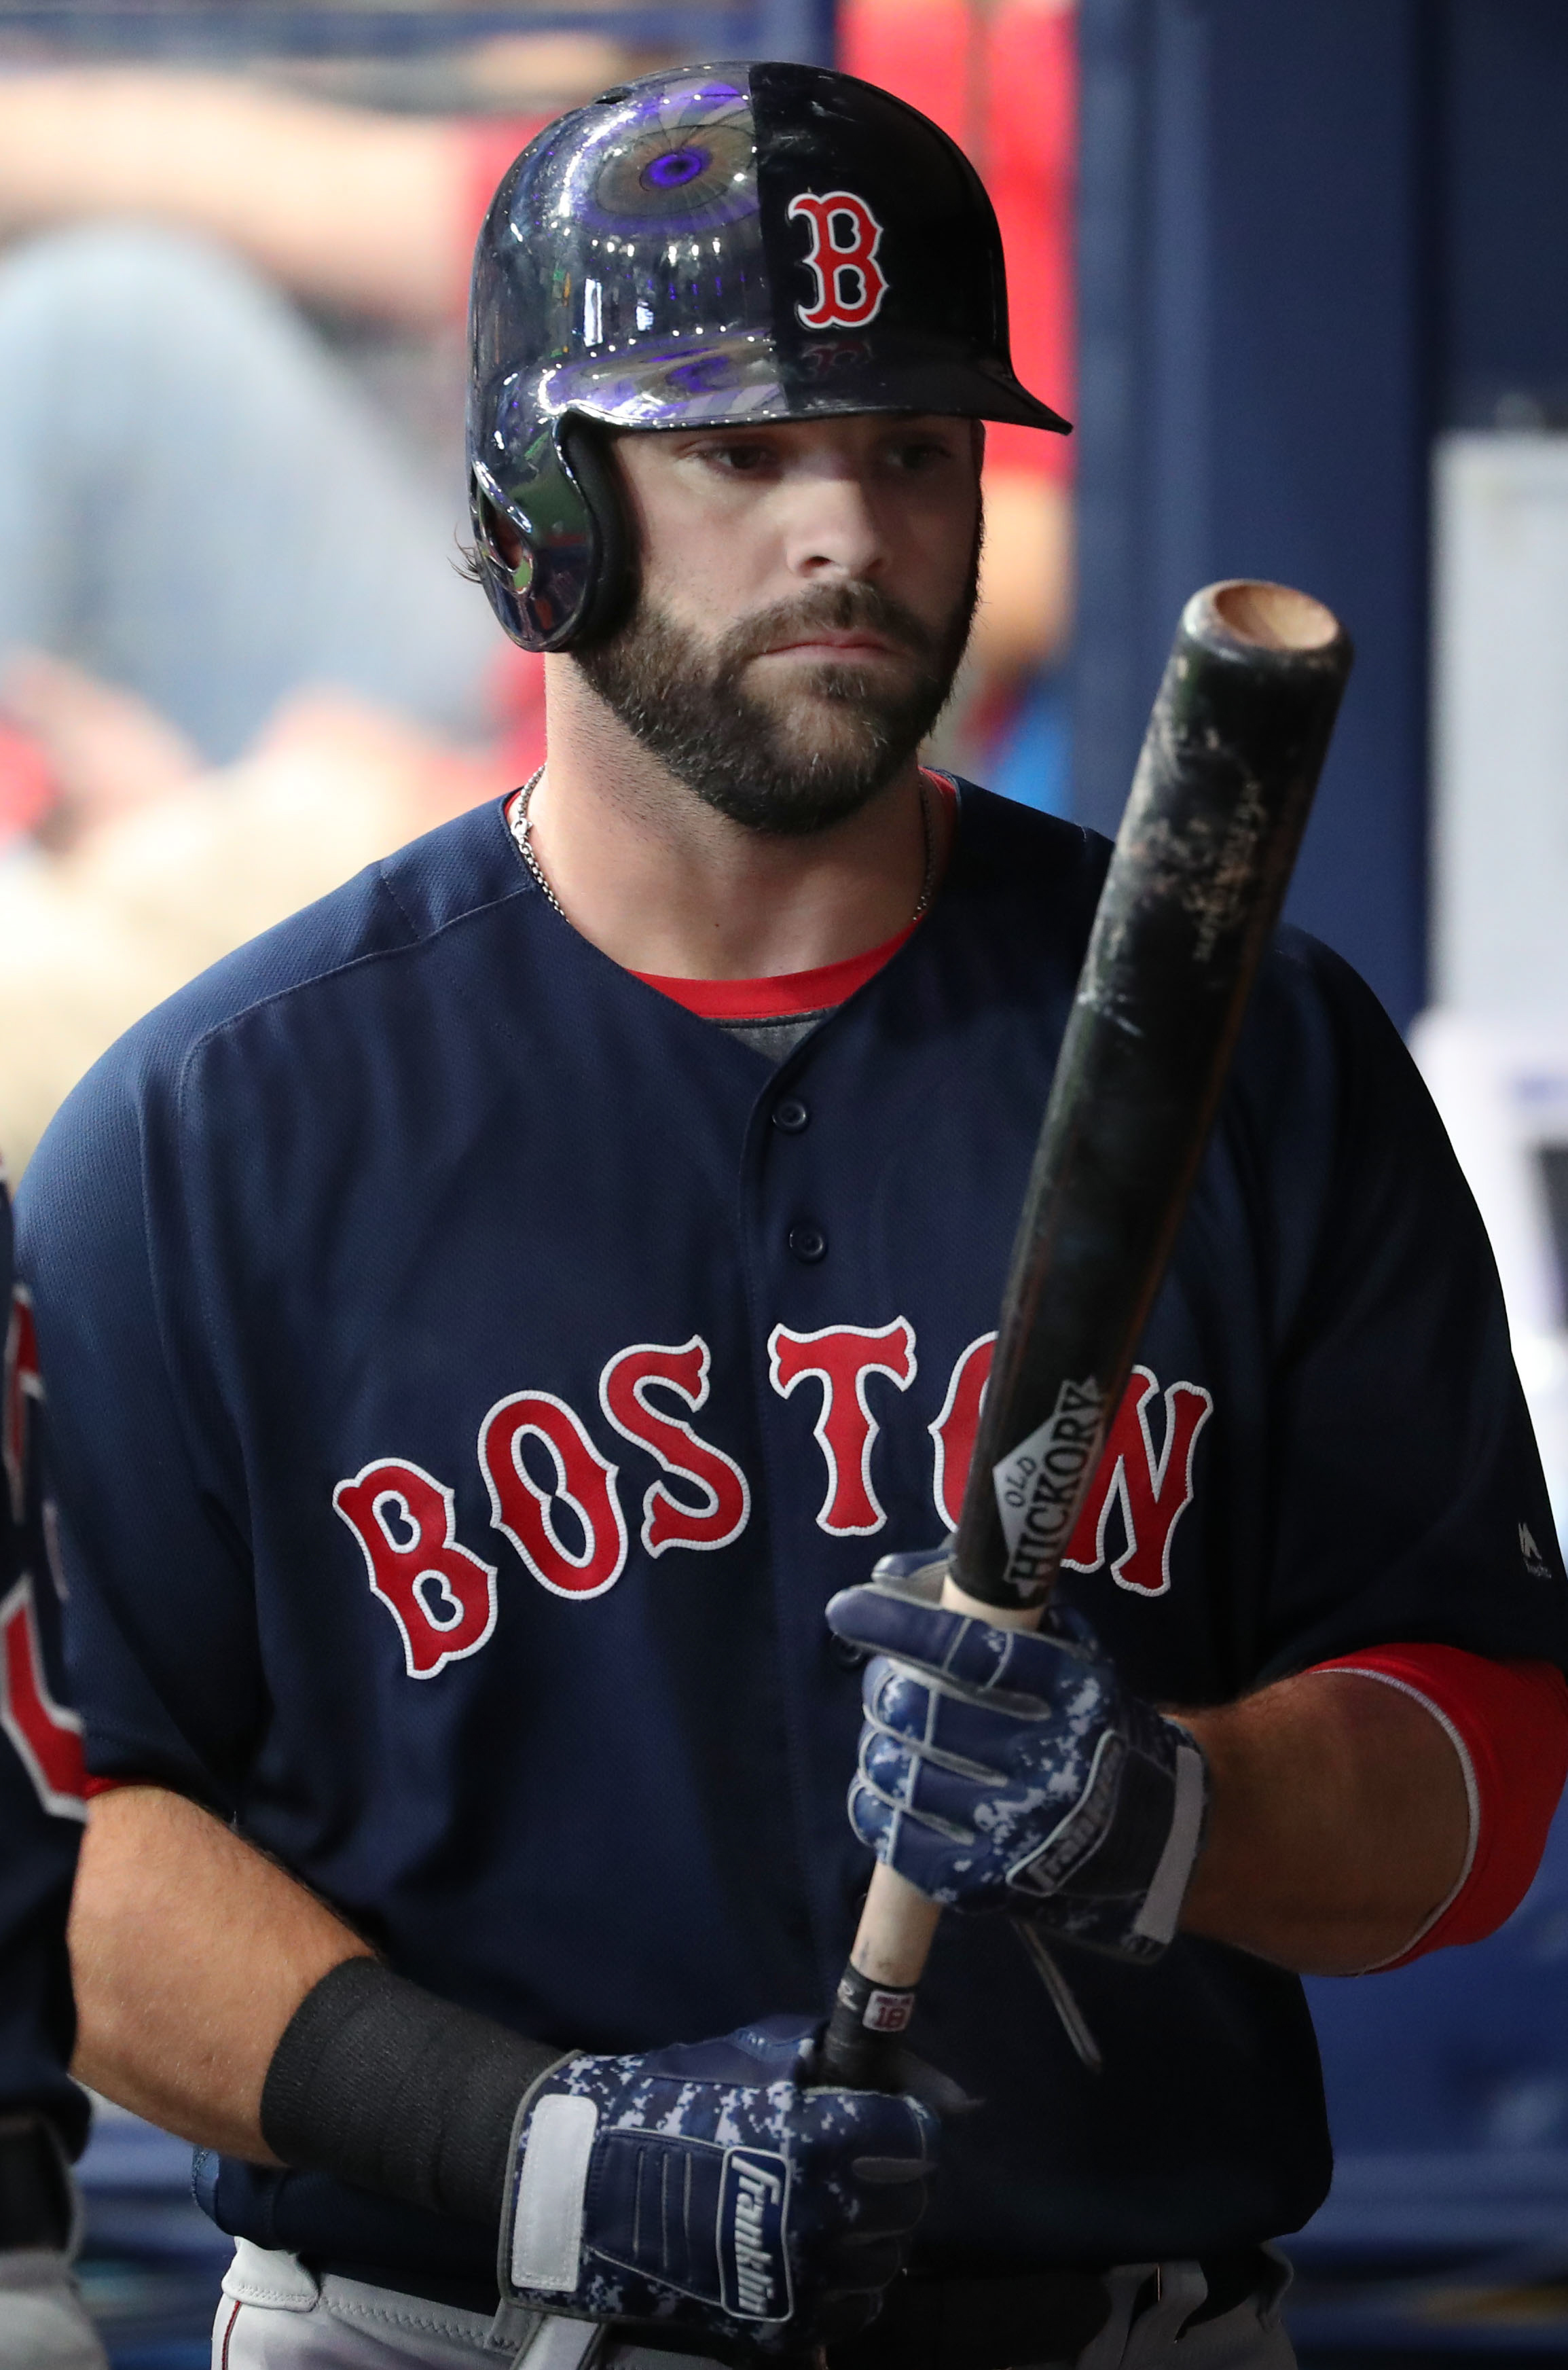 Steve Perrault on X: The Red Sox now have a full season record